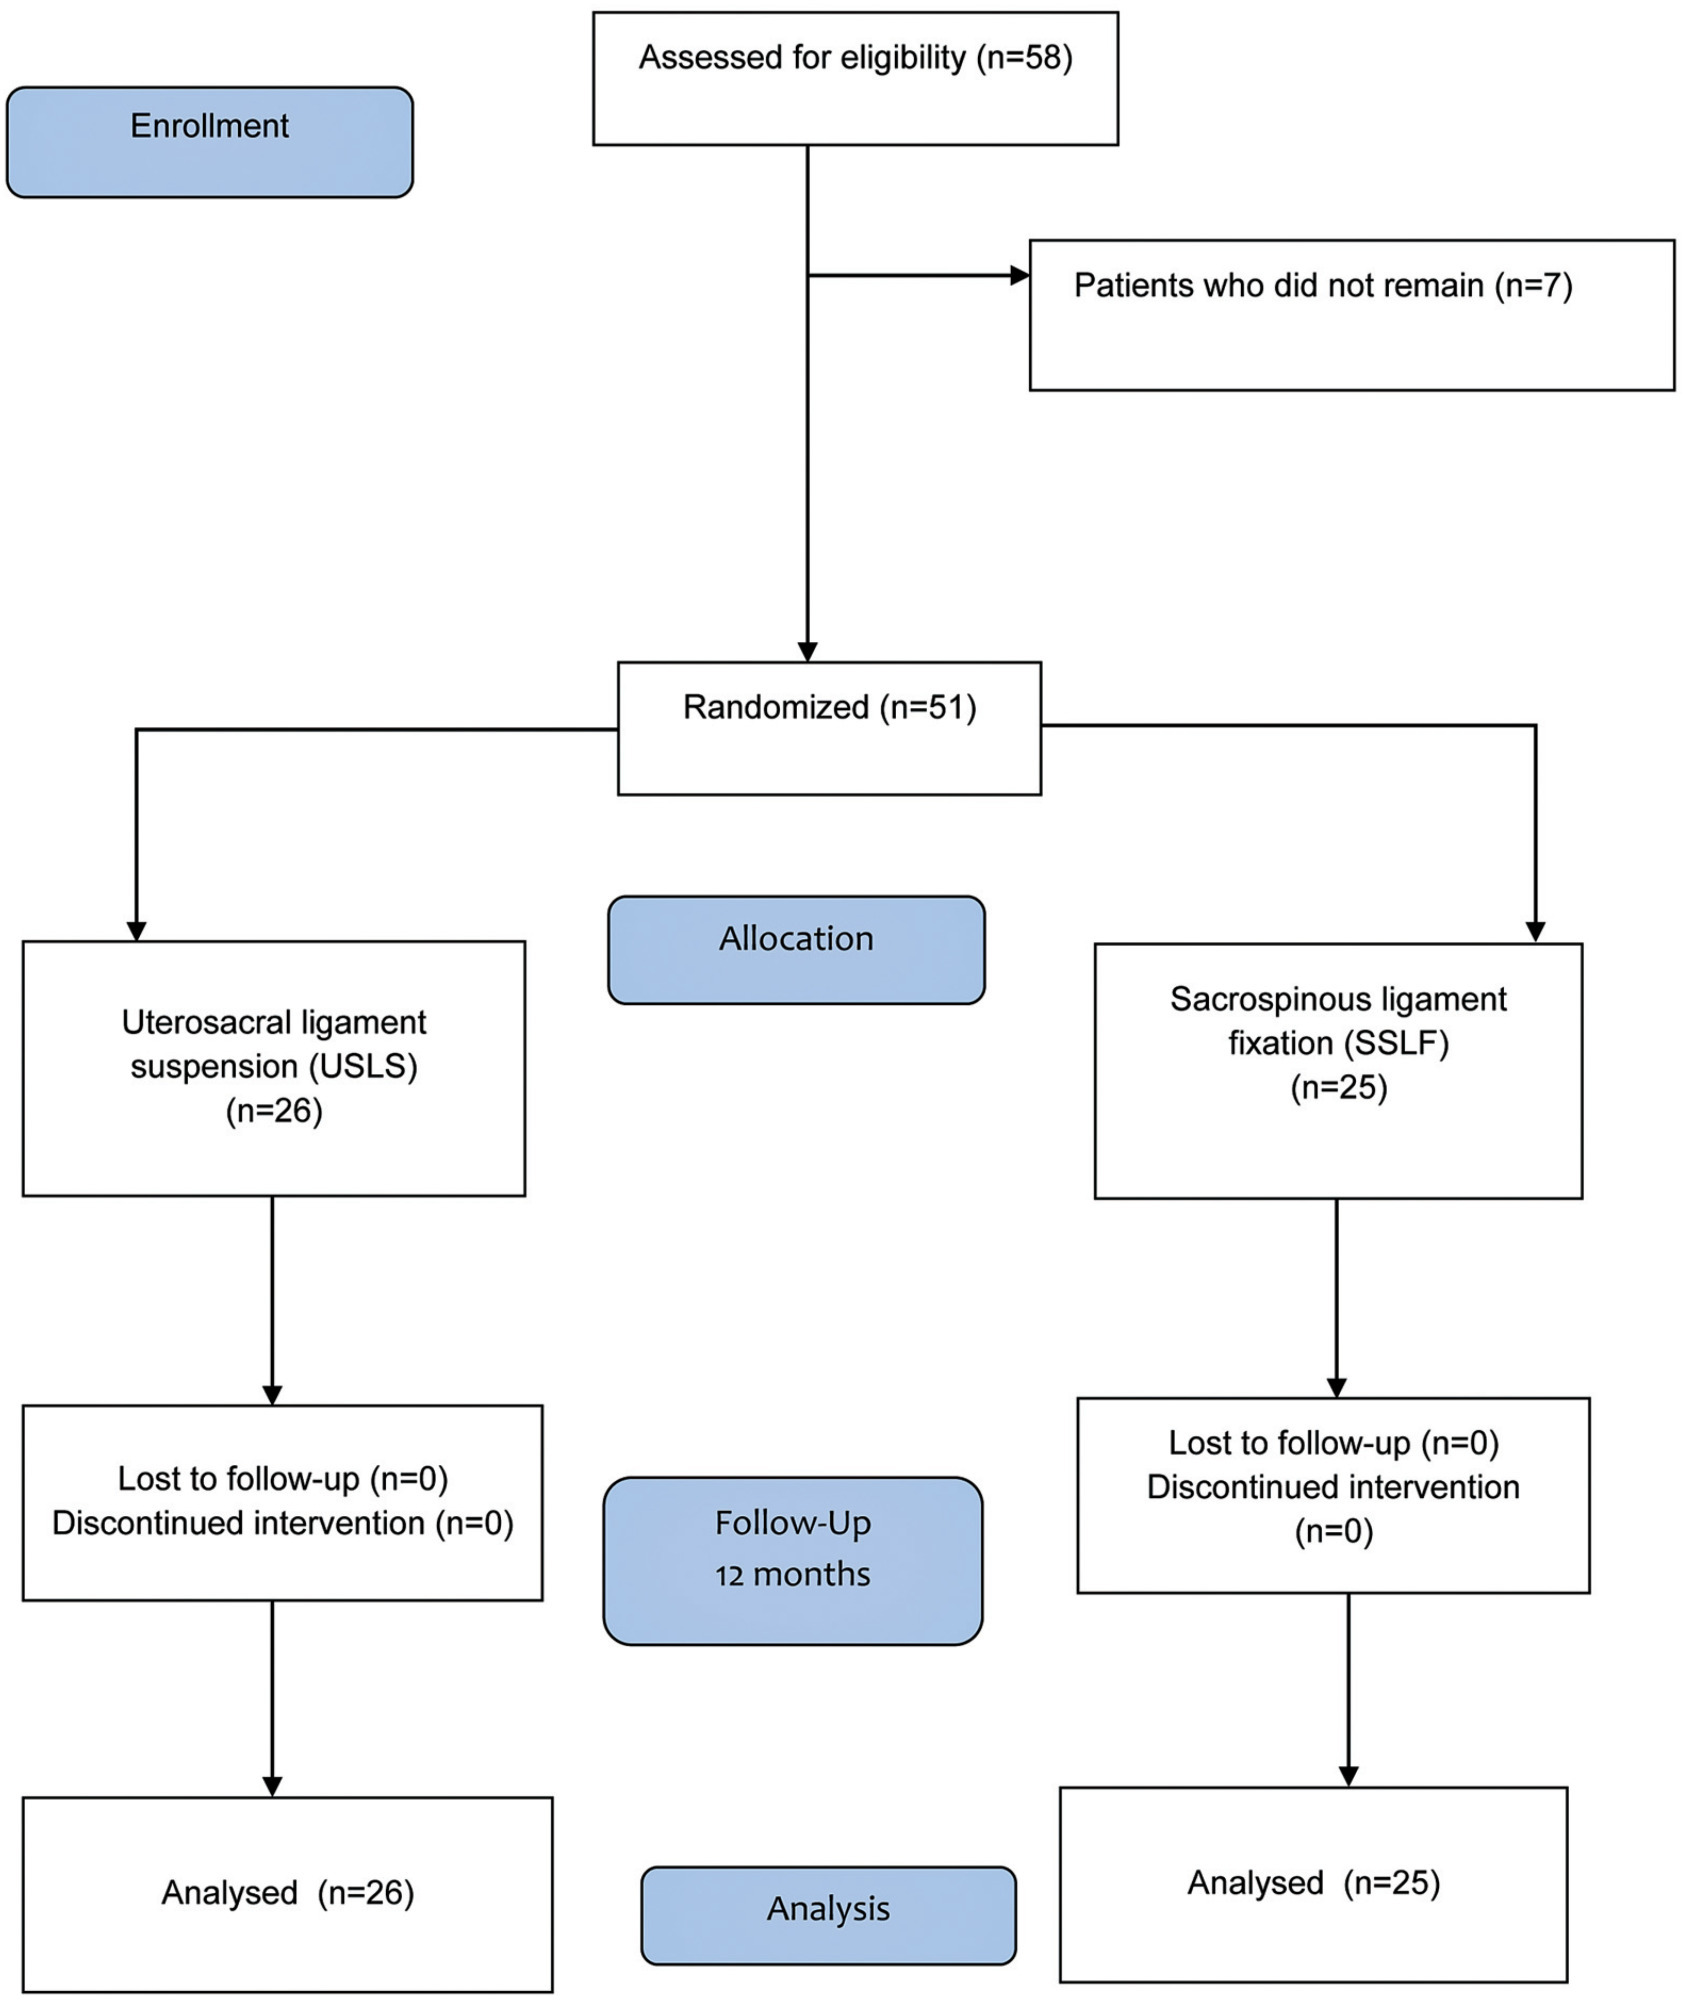 Efficacy of Sacrospinous Fixation or Uterosacral Ligament Suspension for Pelvic Organ Prolapse in Stages III and IV: Randomized Clinical Trial